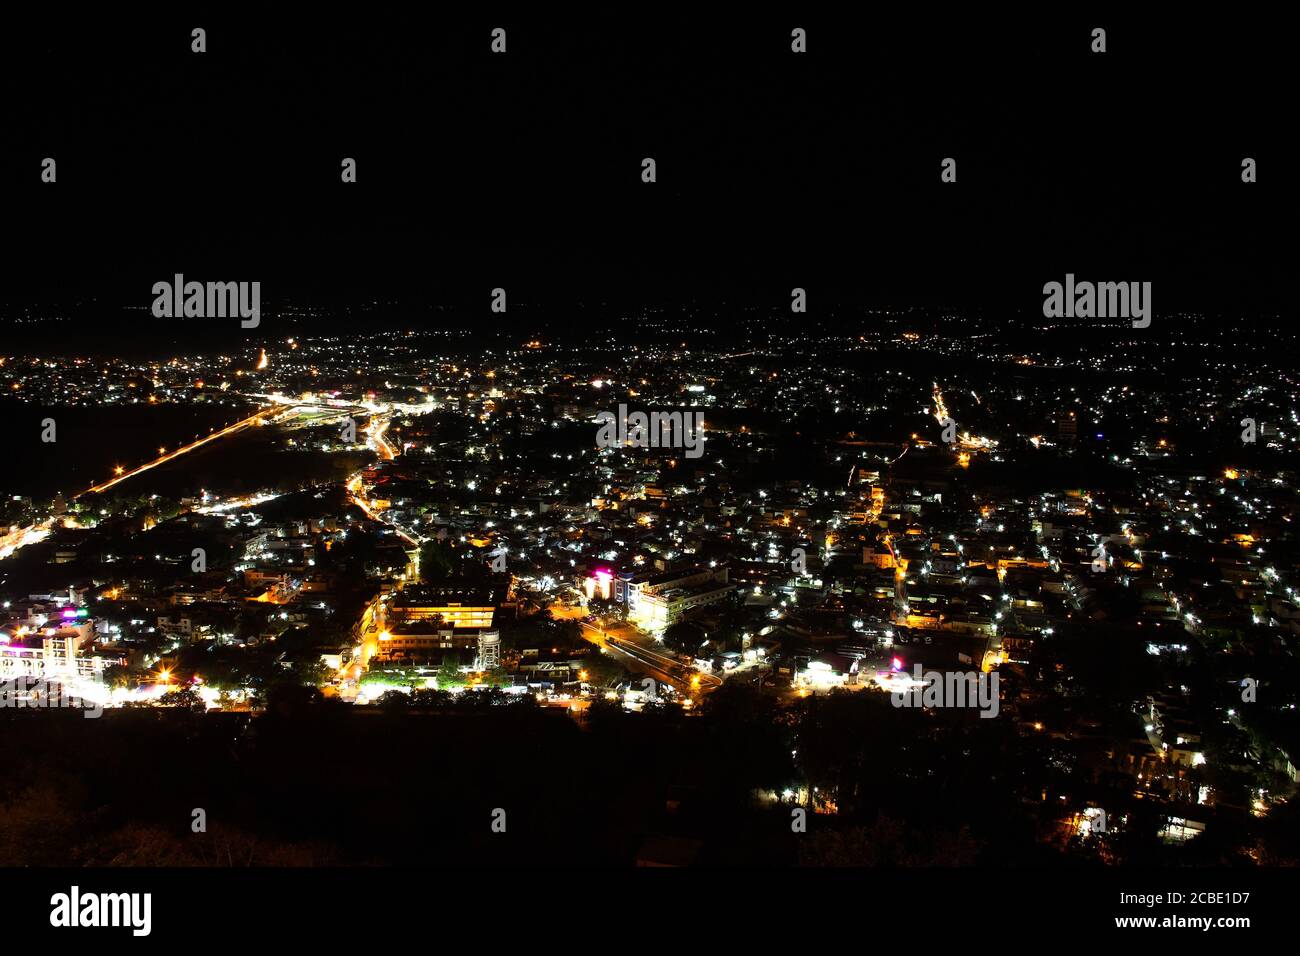 Palani city night view, Tamil Nadu, is famed for its Dravidian-style Hindu temples. A land of cultural and religious heritage Stock Photo